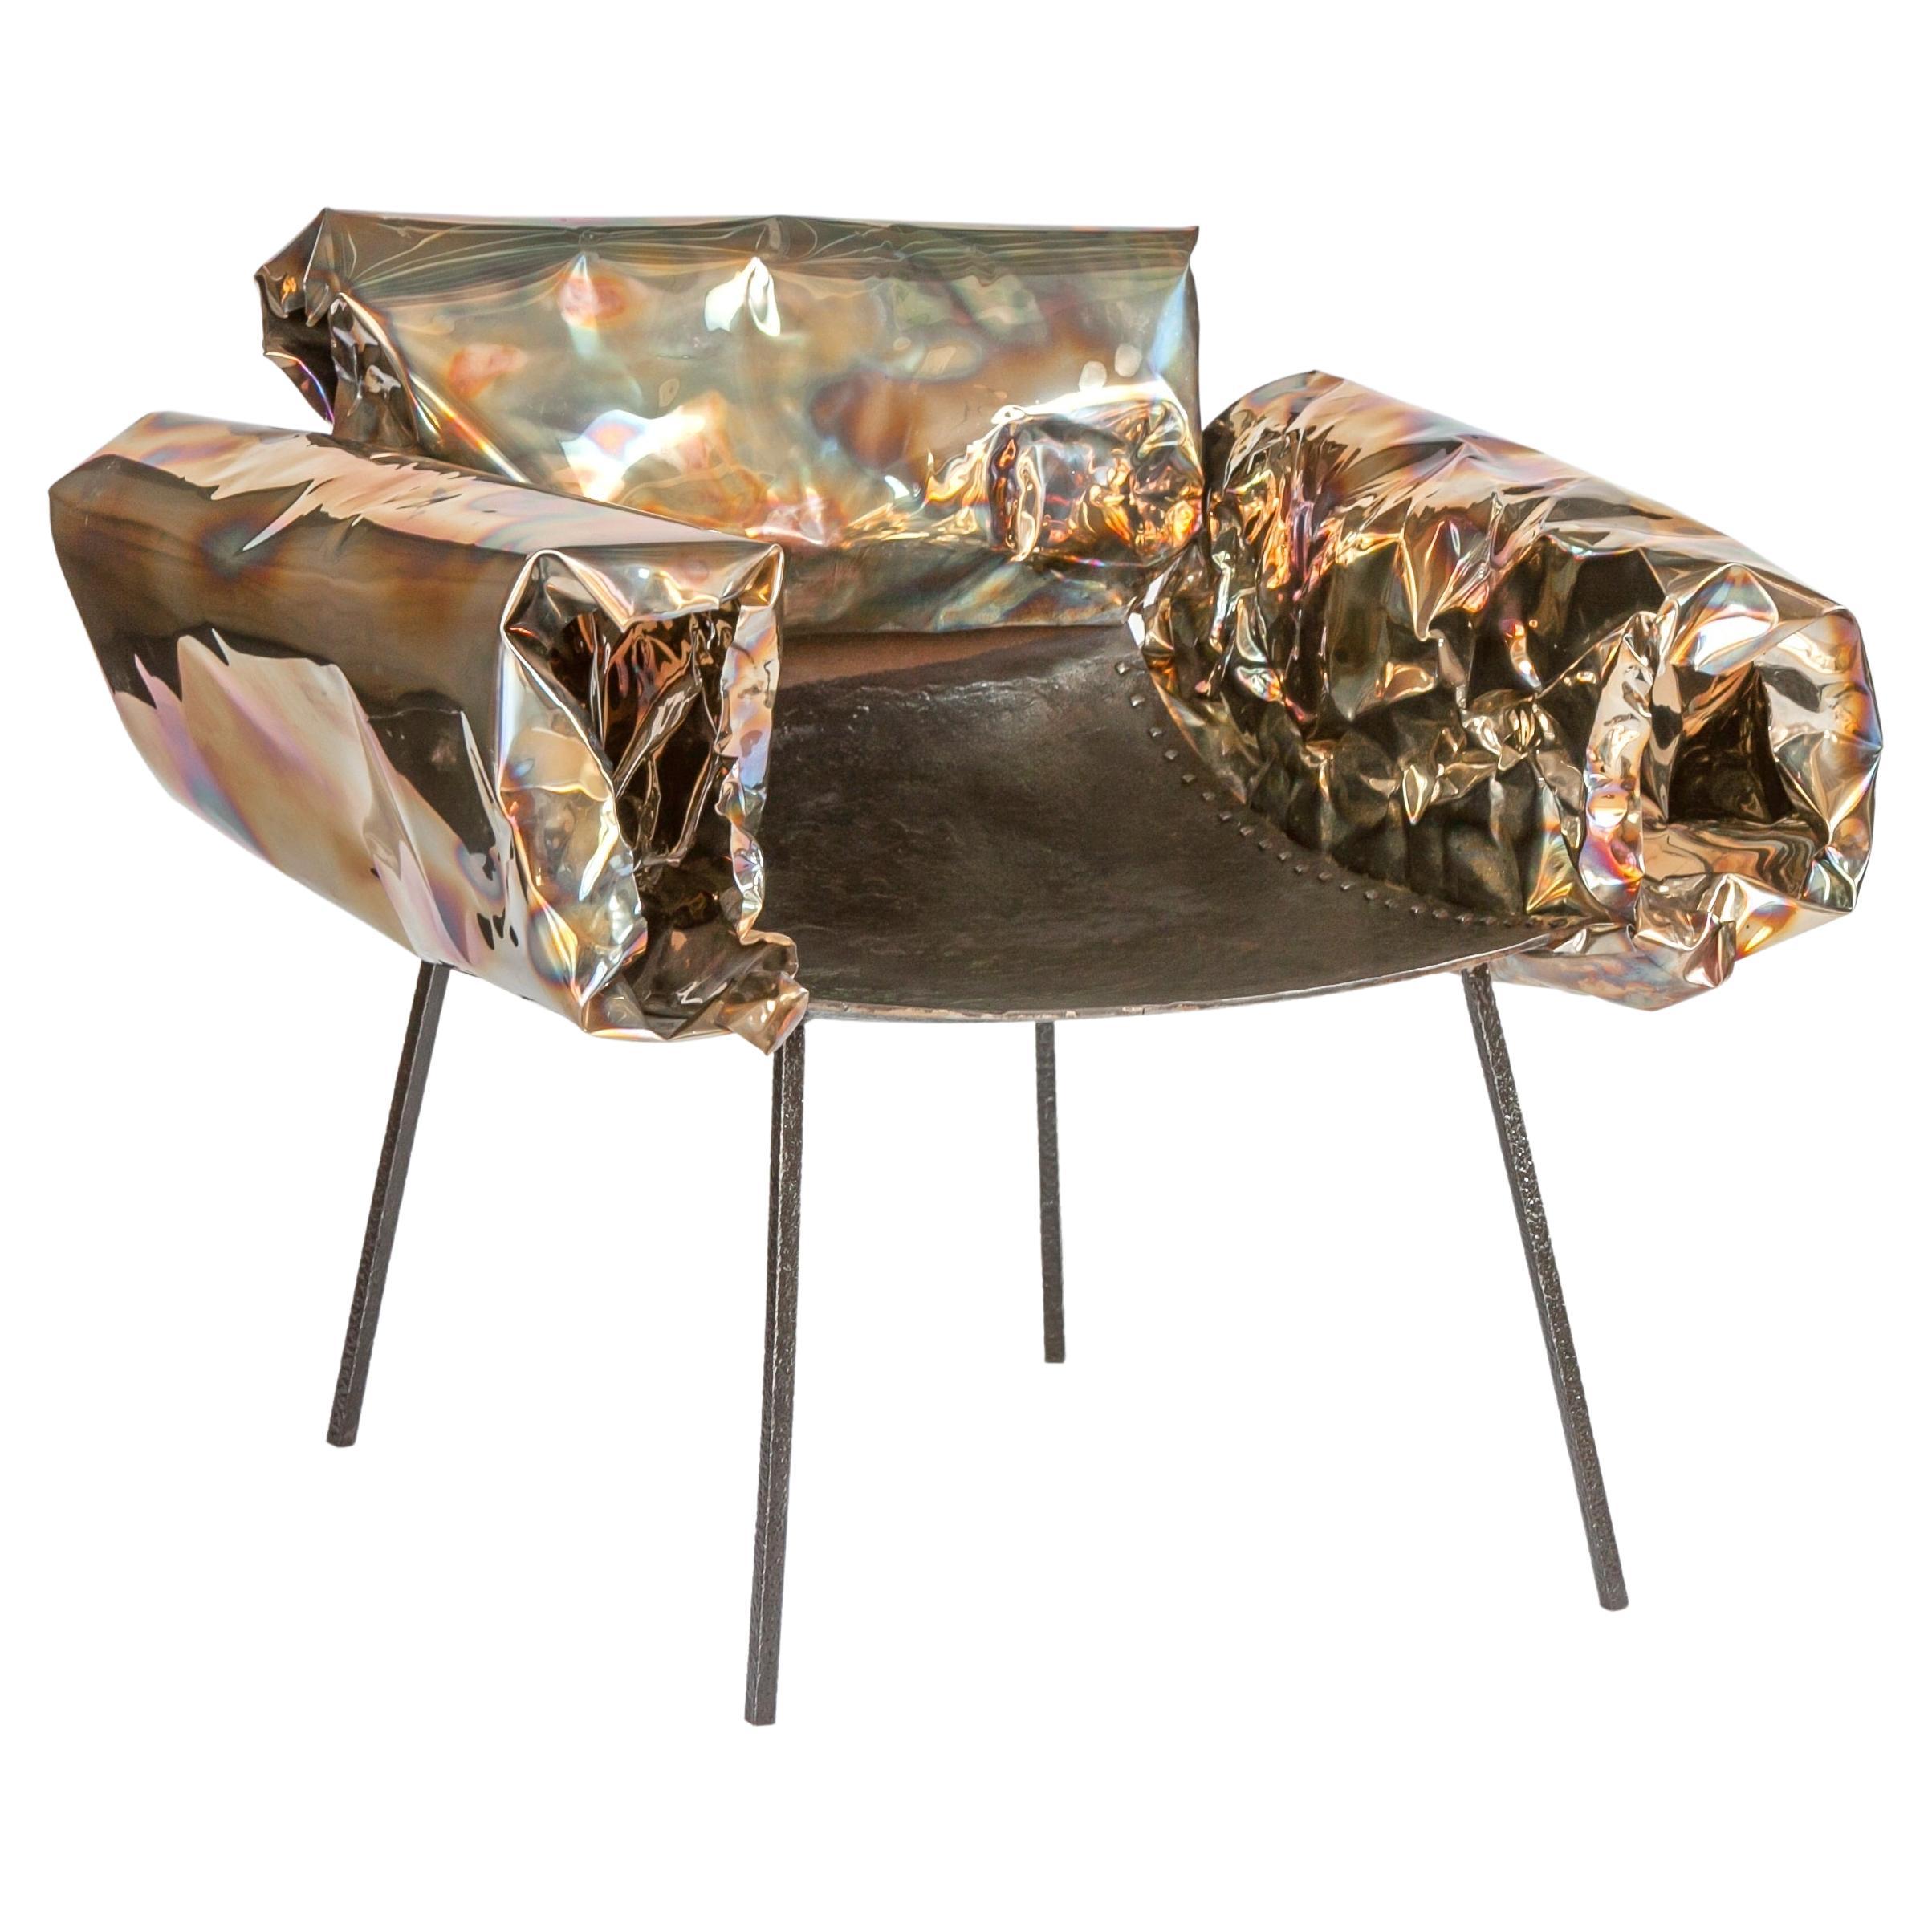 Stainless Steel Iron Puffy Chair by Anadora Lupo 